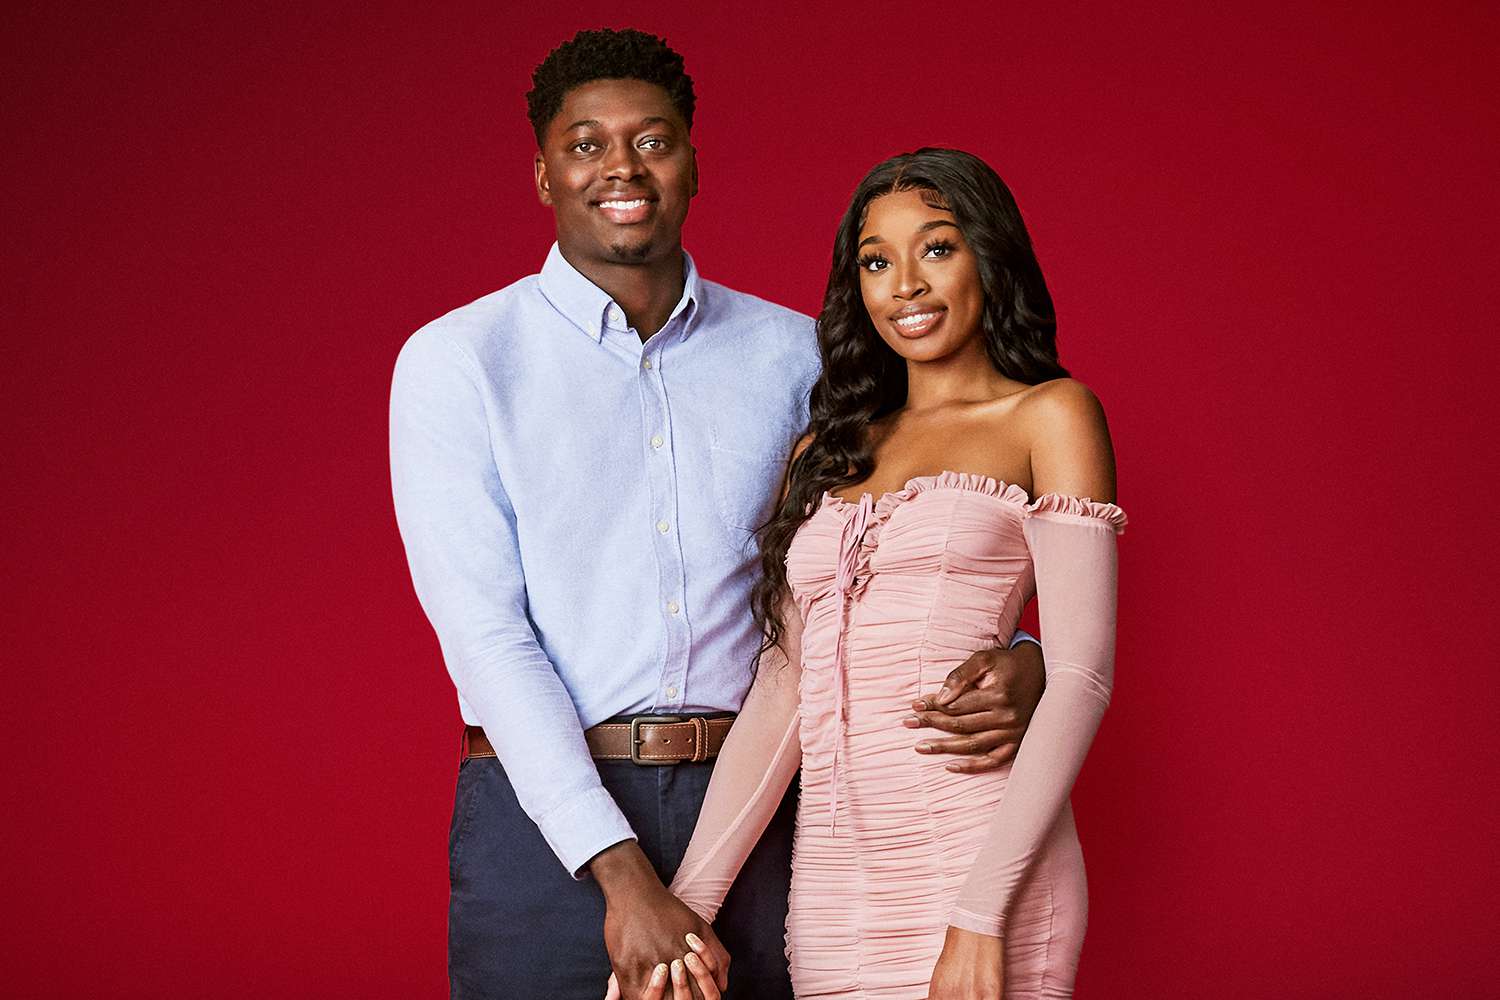 ‘Ultimatum’ Stars Trey Brunson and Jeriah Nelson Announce They’re Expecting!